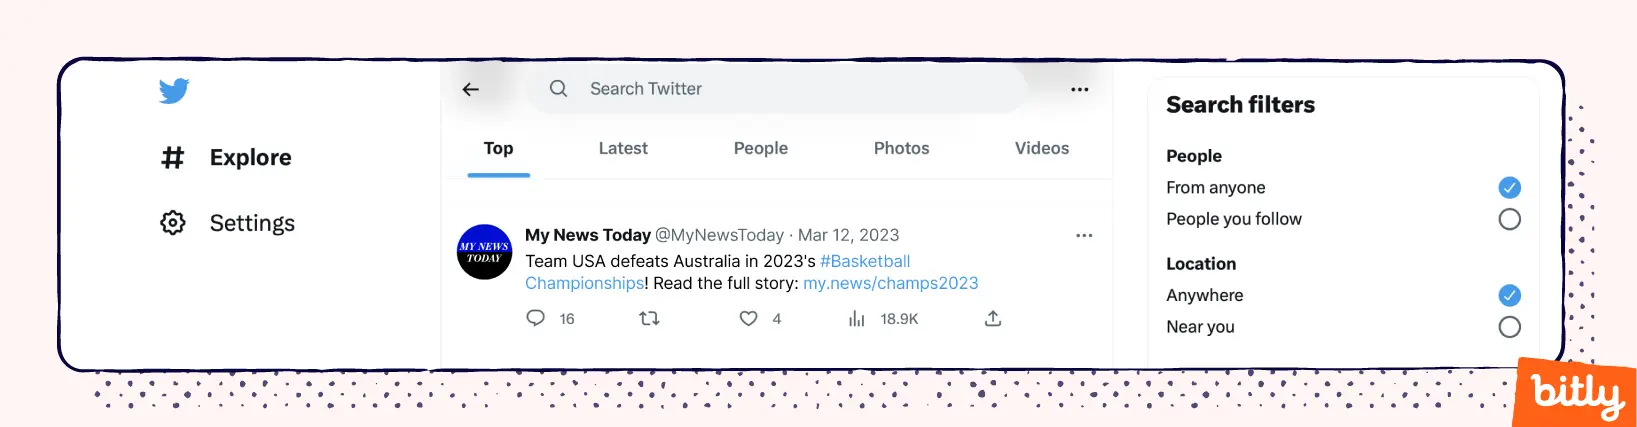 A tweet from the company My News Today about a basketball championship game.